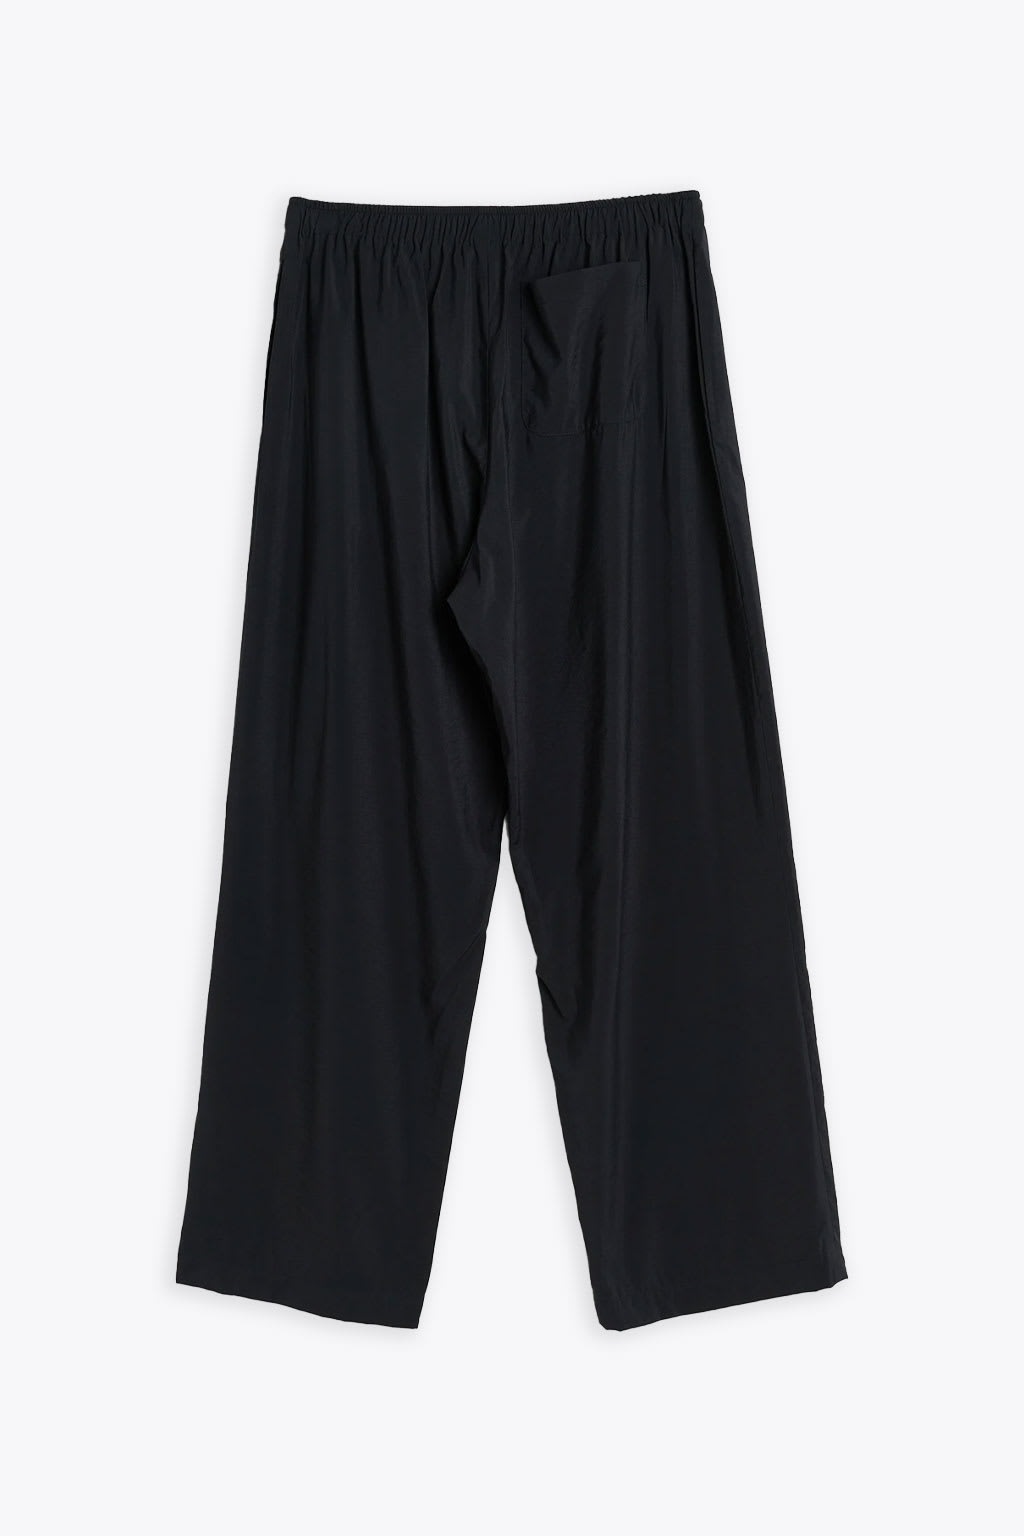 Shop Our Legacy Luft Trouser Black Liquid Viscose Drawstring Pant - Luft Trouser In Nero